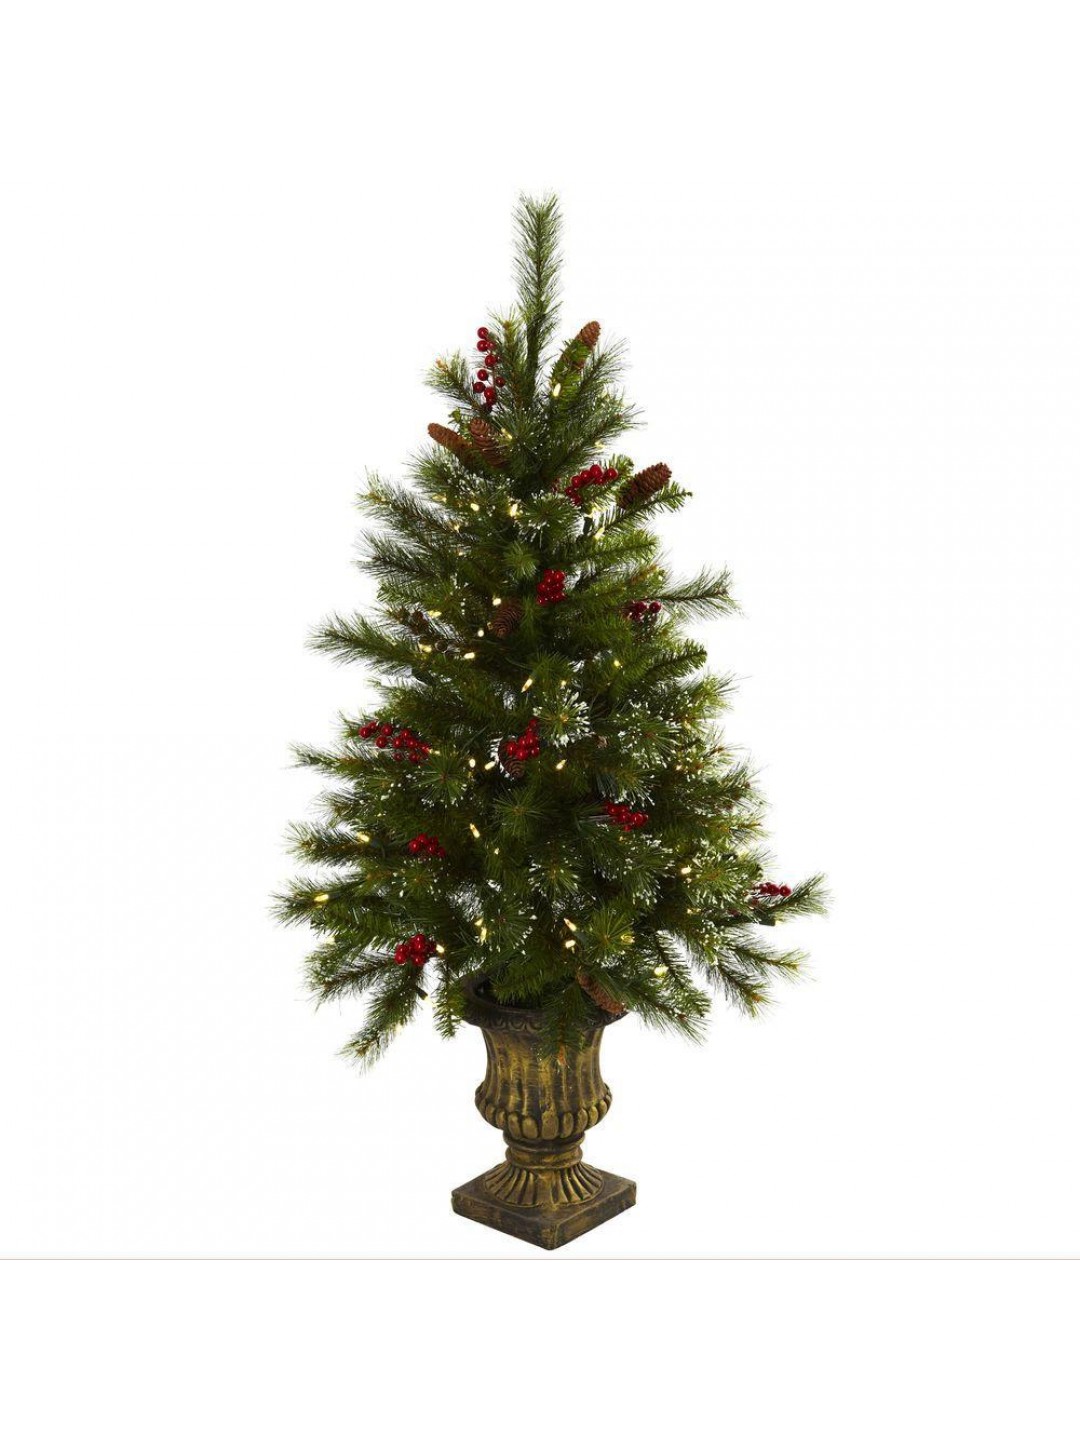 4 ft. Artificial Christmas Tree with Berries, Pine Cones, LED Lights and Decorative Urn